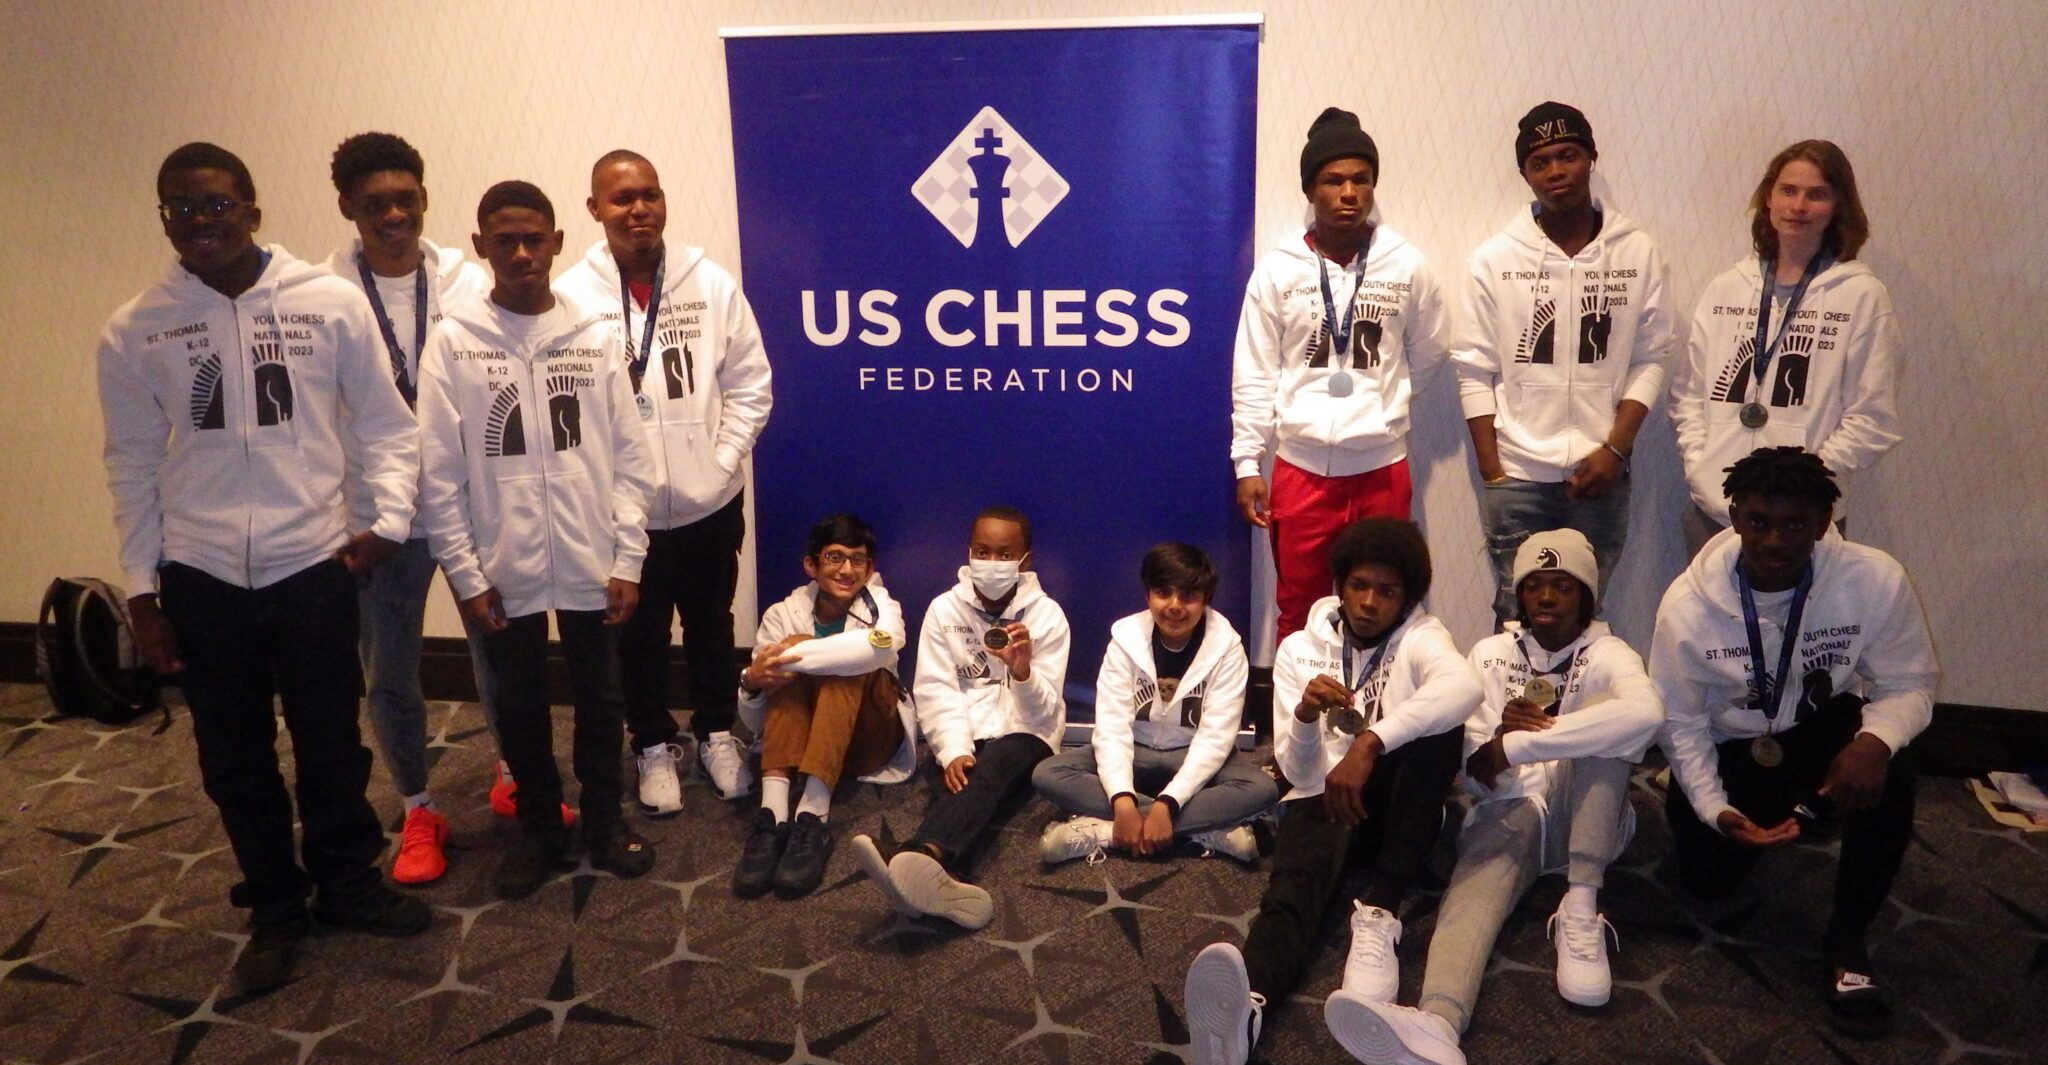 V.I. Students Compete at National K12 Scholastic Chess Tournament in D